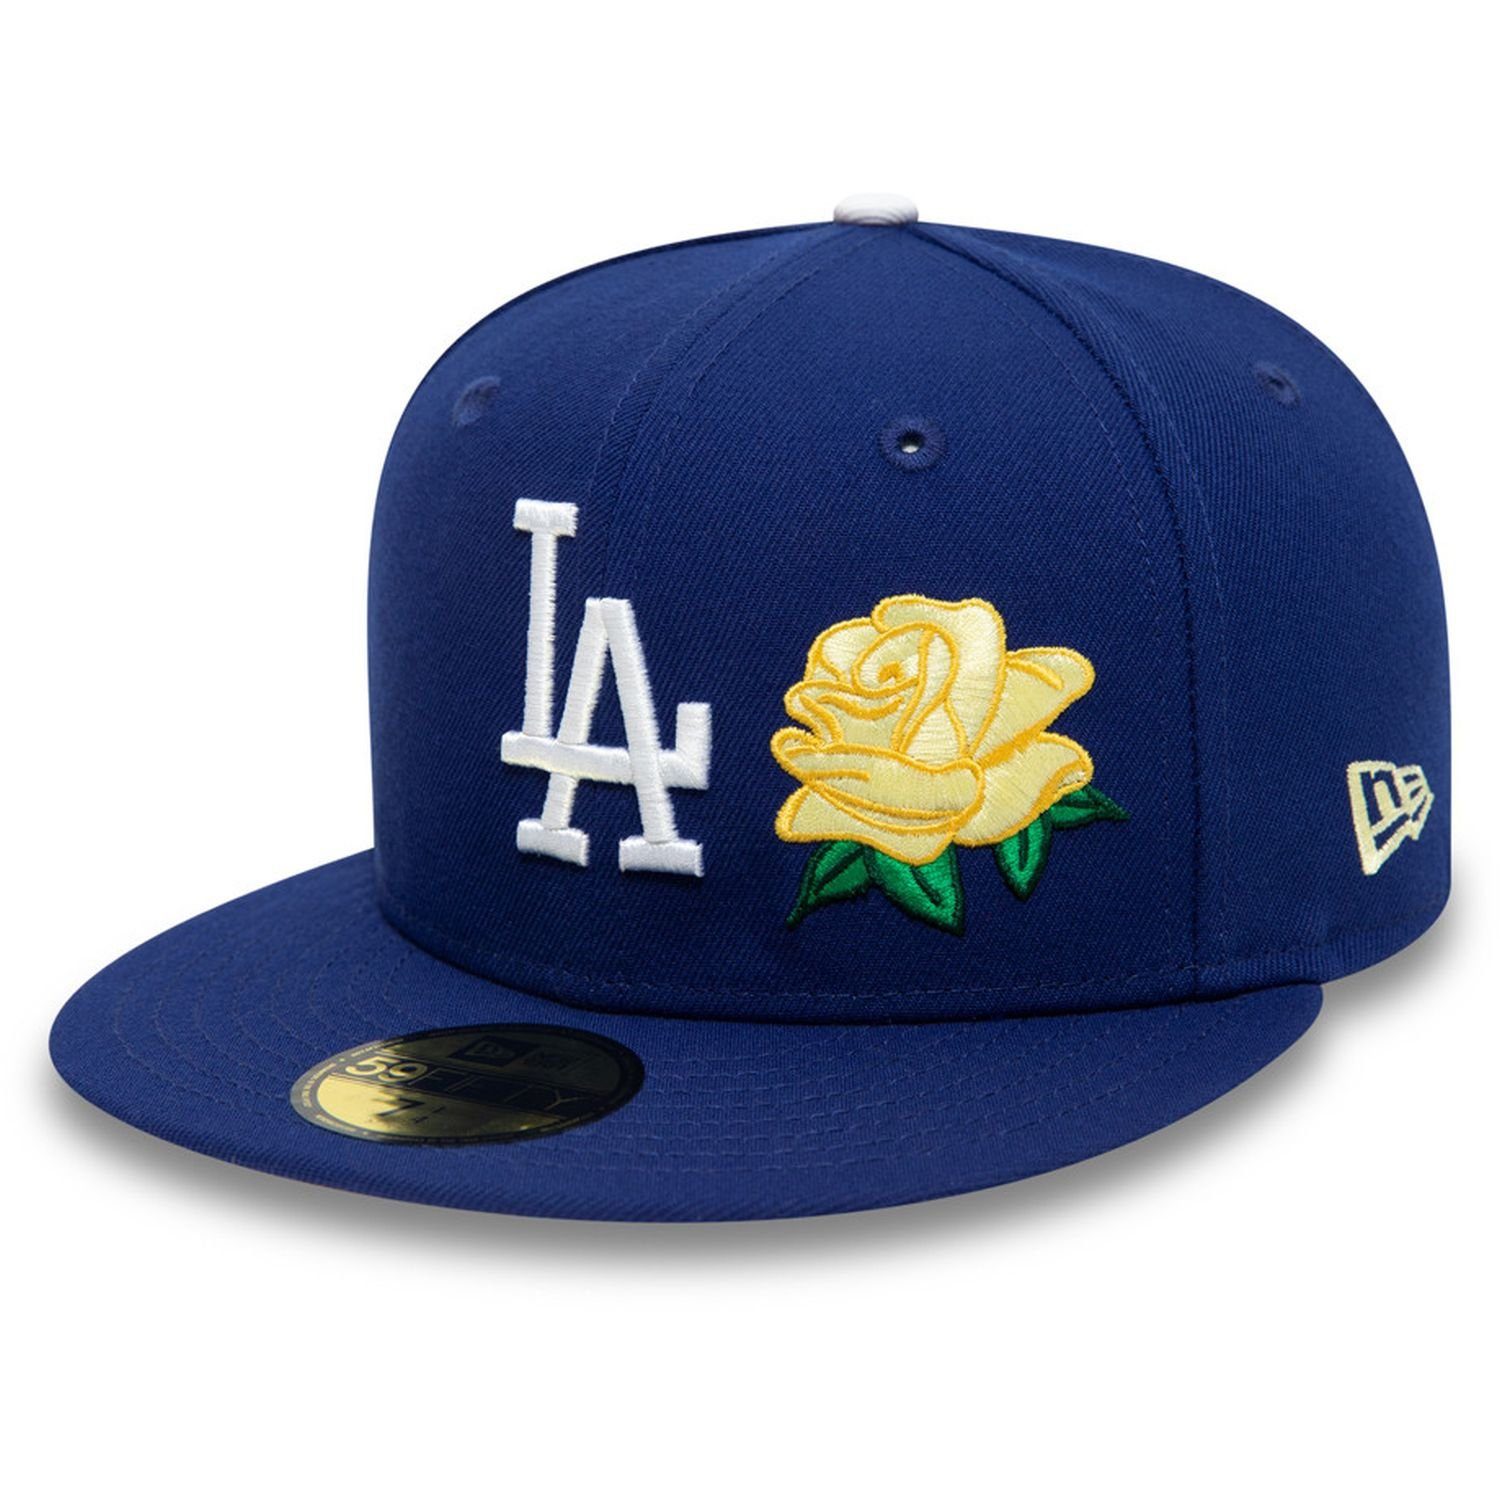 Fitted Los New Dodgers 59Fifty Era Cap Angeles